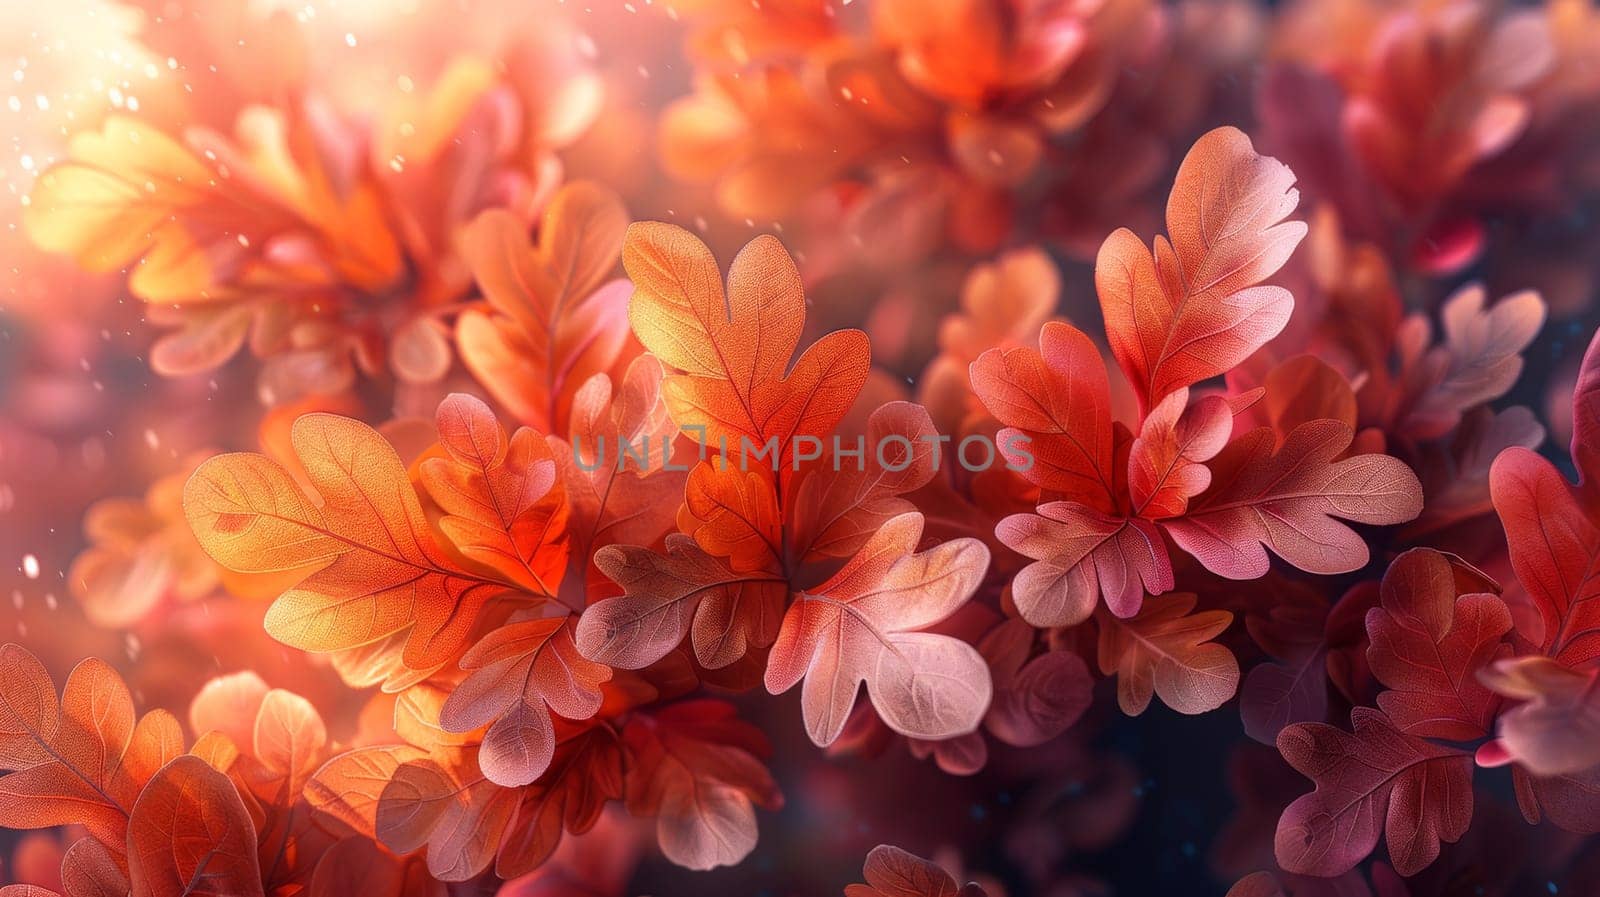 Autumn leaves background, environment background and desktop wallpaper.